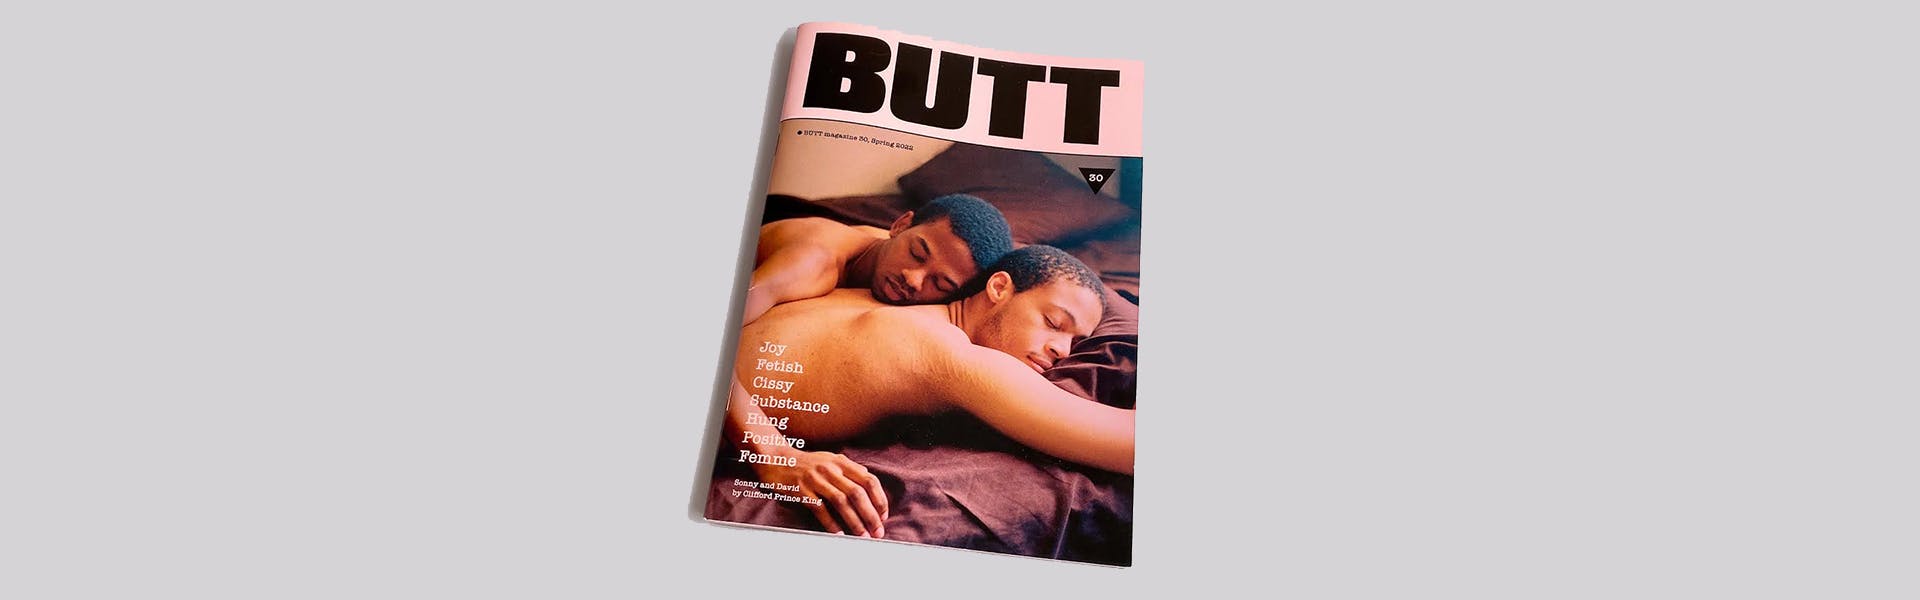 Butt issue 30 cover